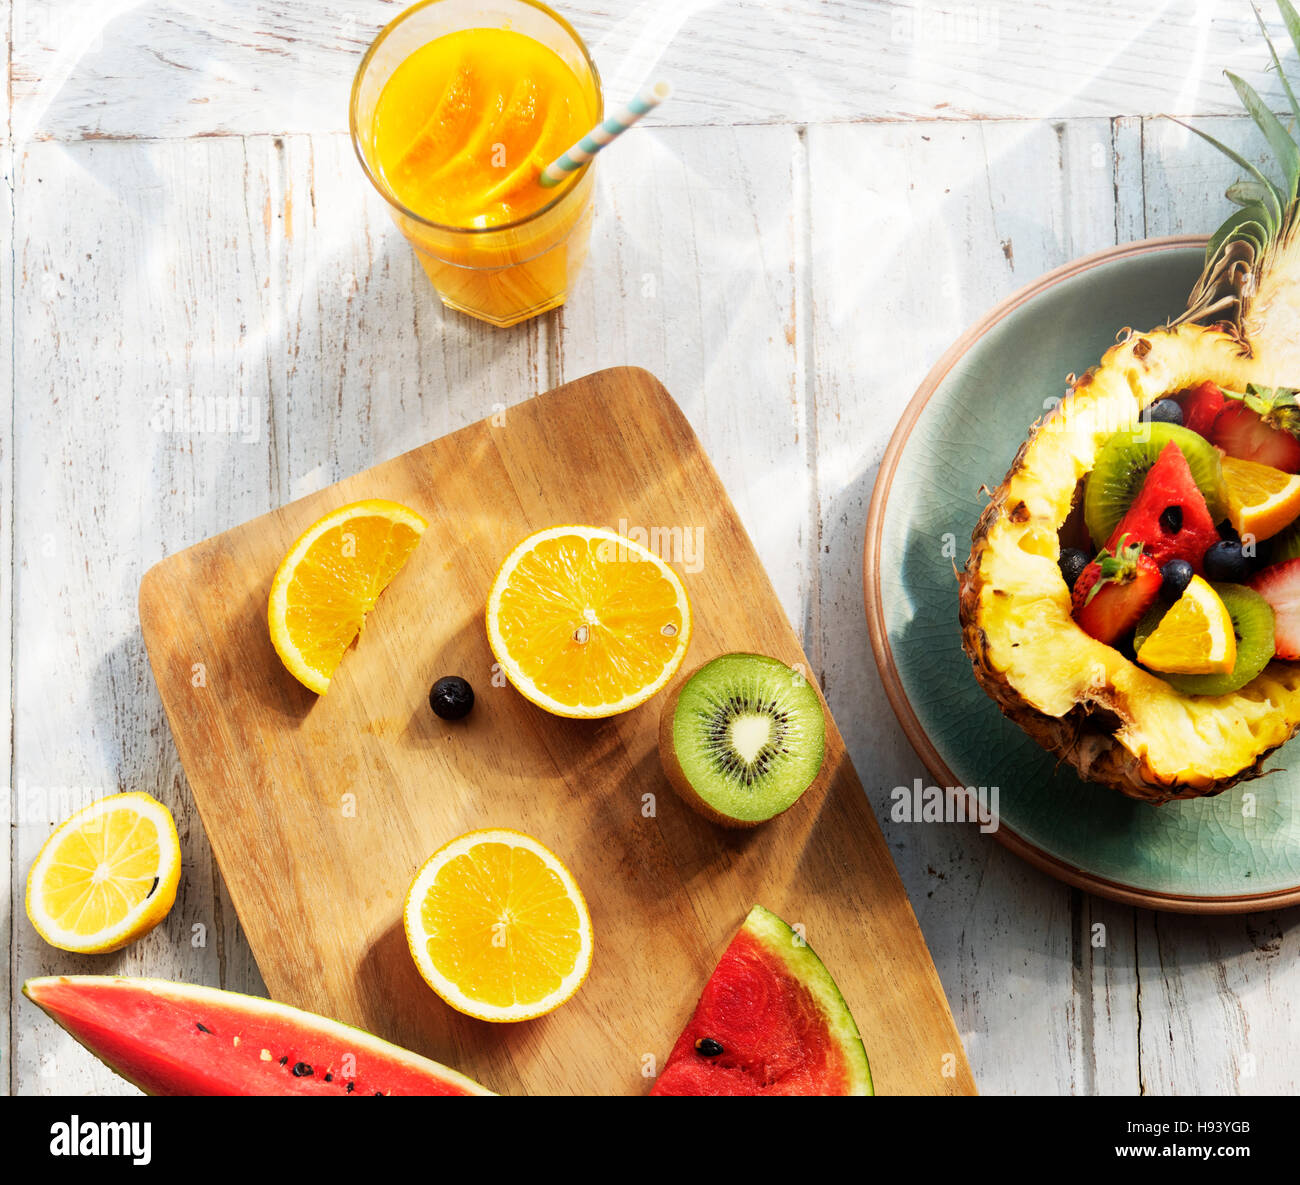 Tropical Fruit Healthy Eating Vitamin Natural Nutrition Concept Stock Photo